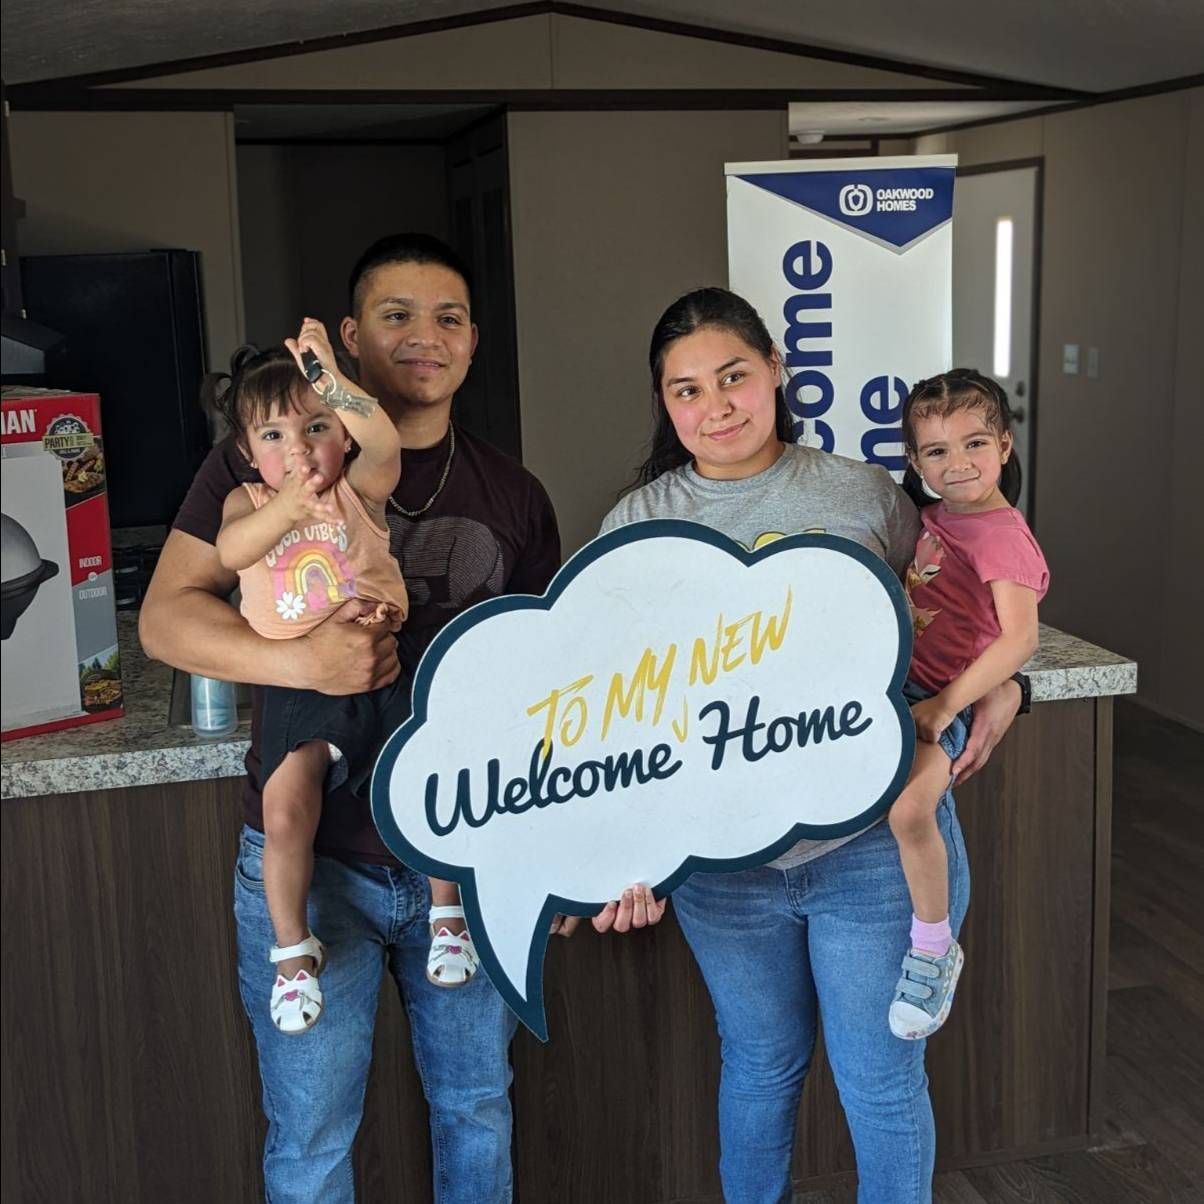 ERICK G. welcome home image